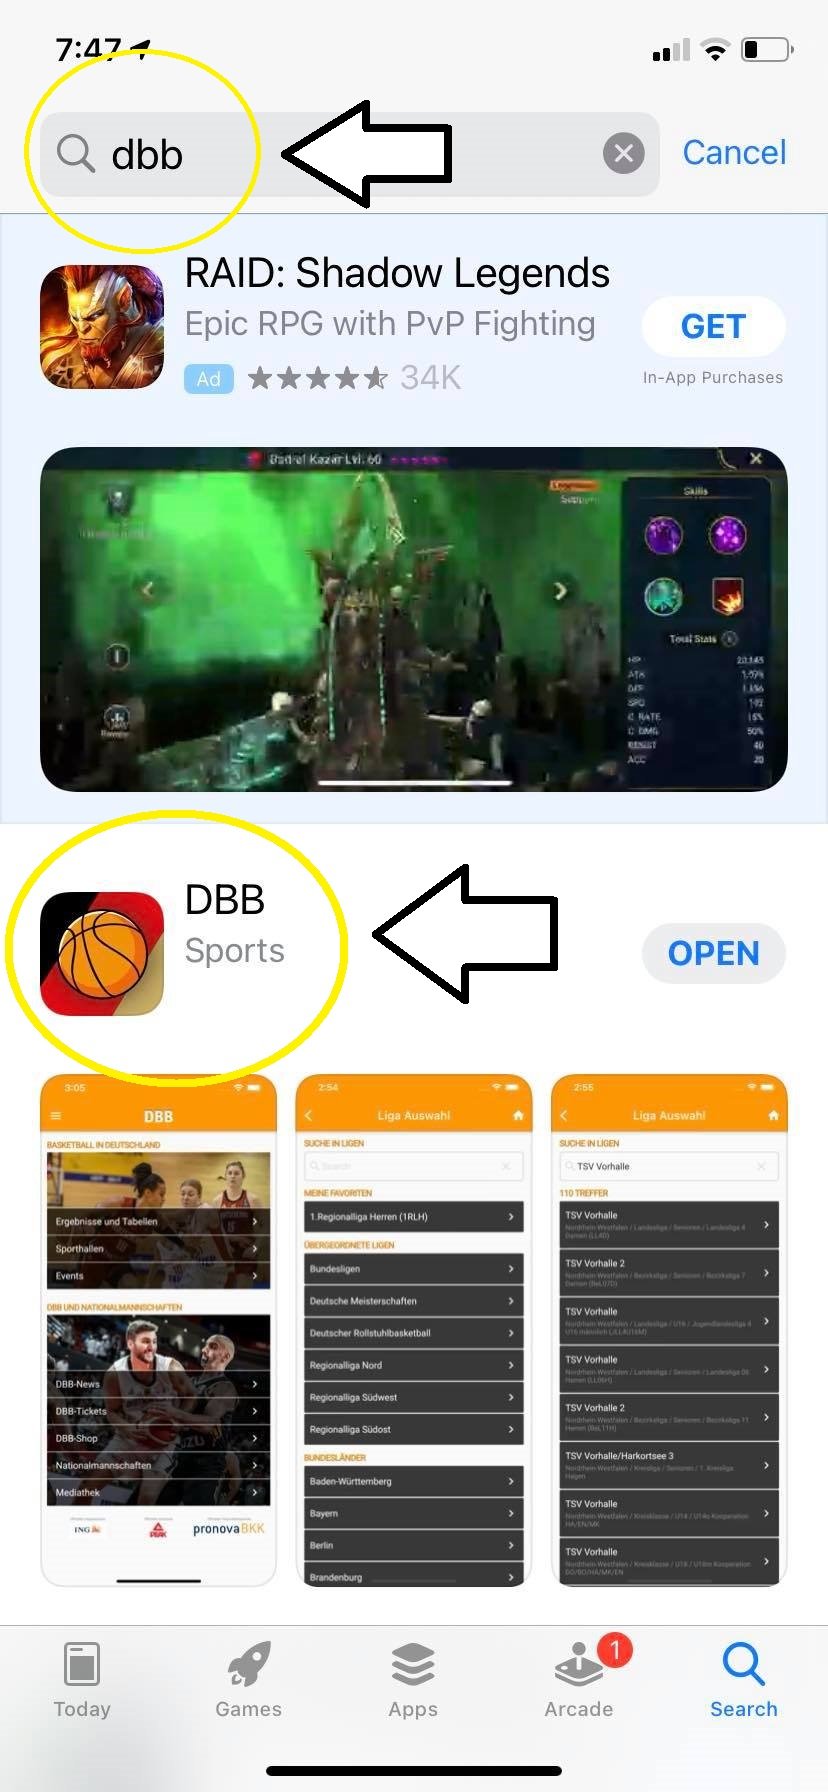 Overseas basketball players interested in contacting teams in Germany should download an app called DBB.